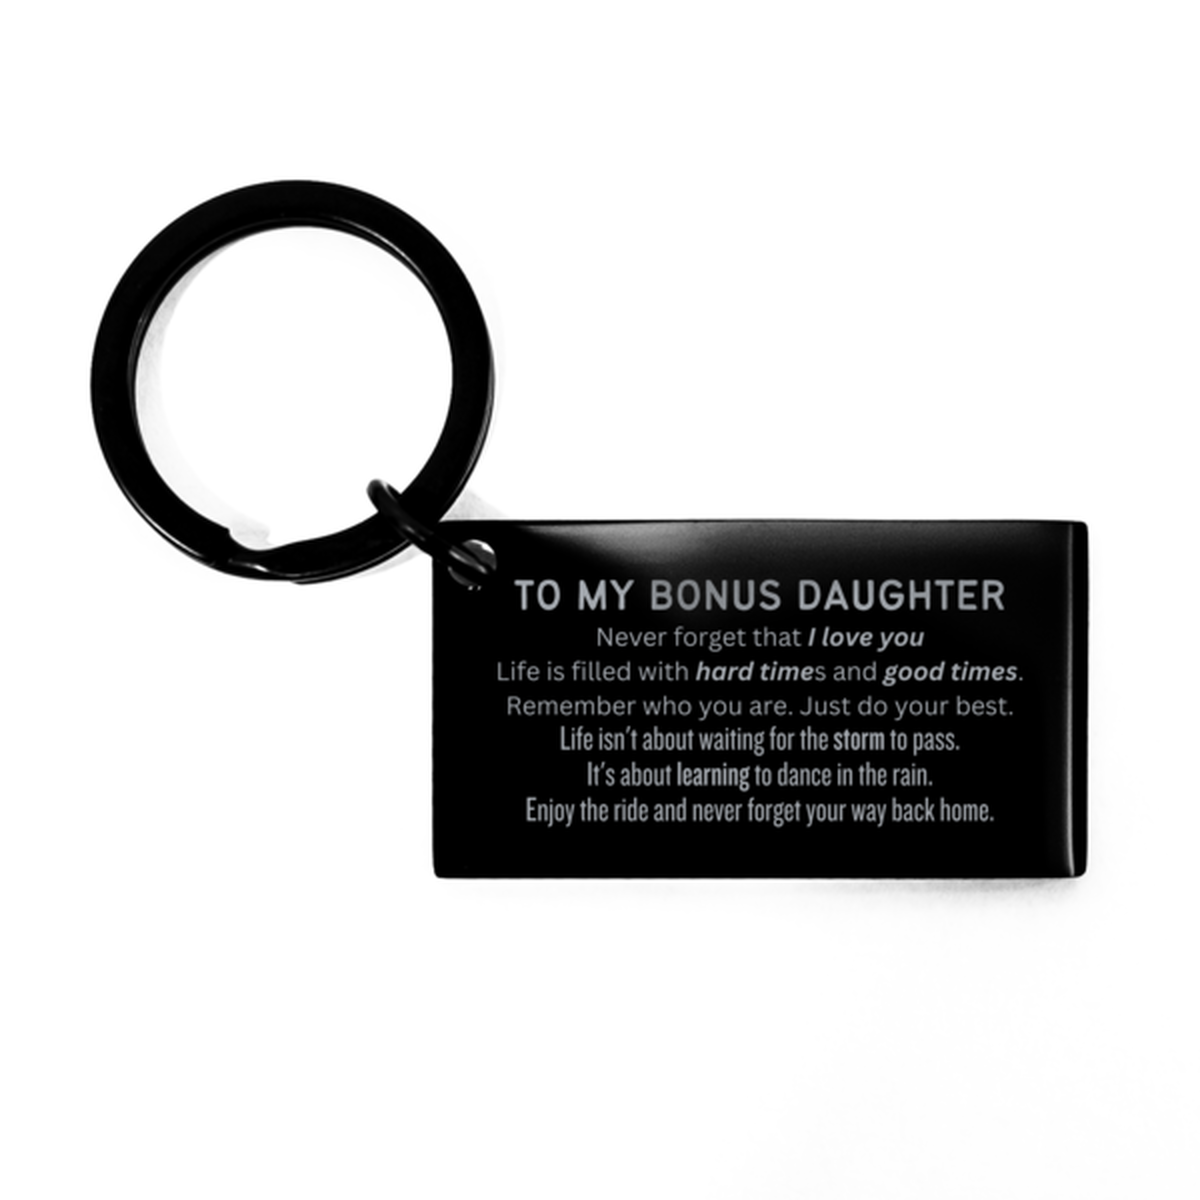 Christmas Bonus Daughter Keychain Gifts, To My Bonus Daughter Birthday Thank You Gifts For Bonus Daughter, Graduation Unique Gifts For Bonus Daughter To My Bonus Daughter Never forget that I love you life is filled with hard times and good times. Remember